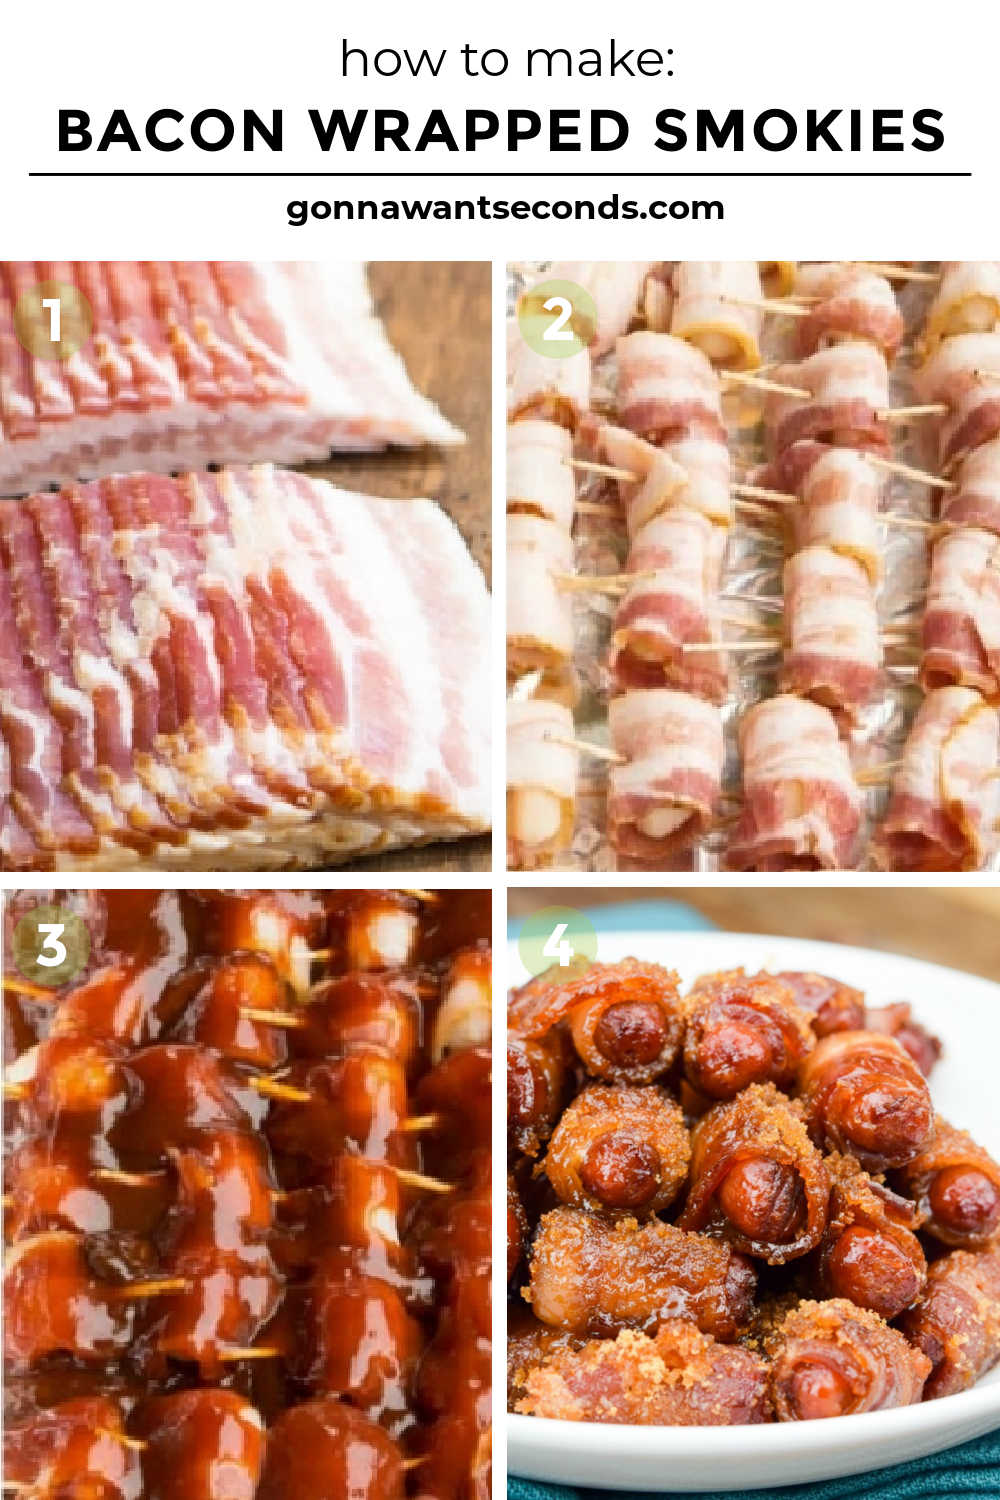 Step by step how to make bacon wrapped smokies